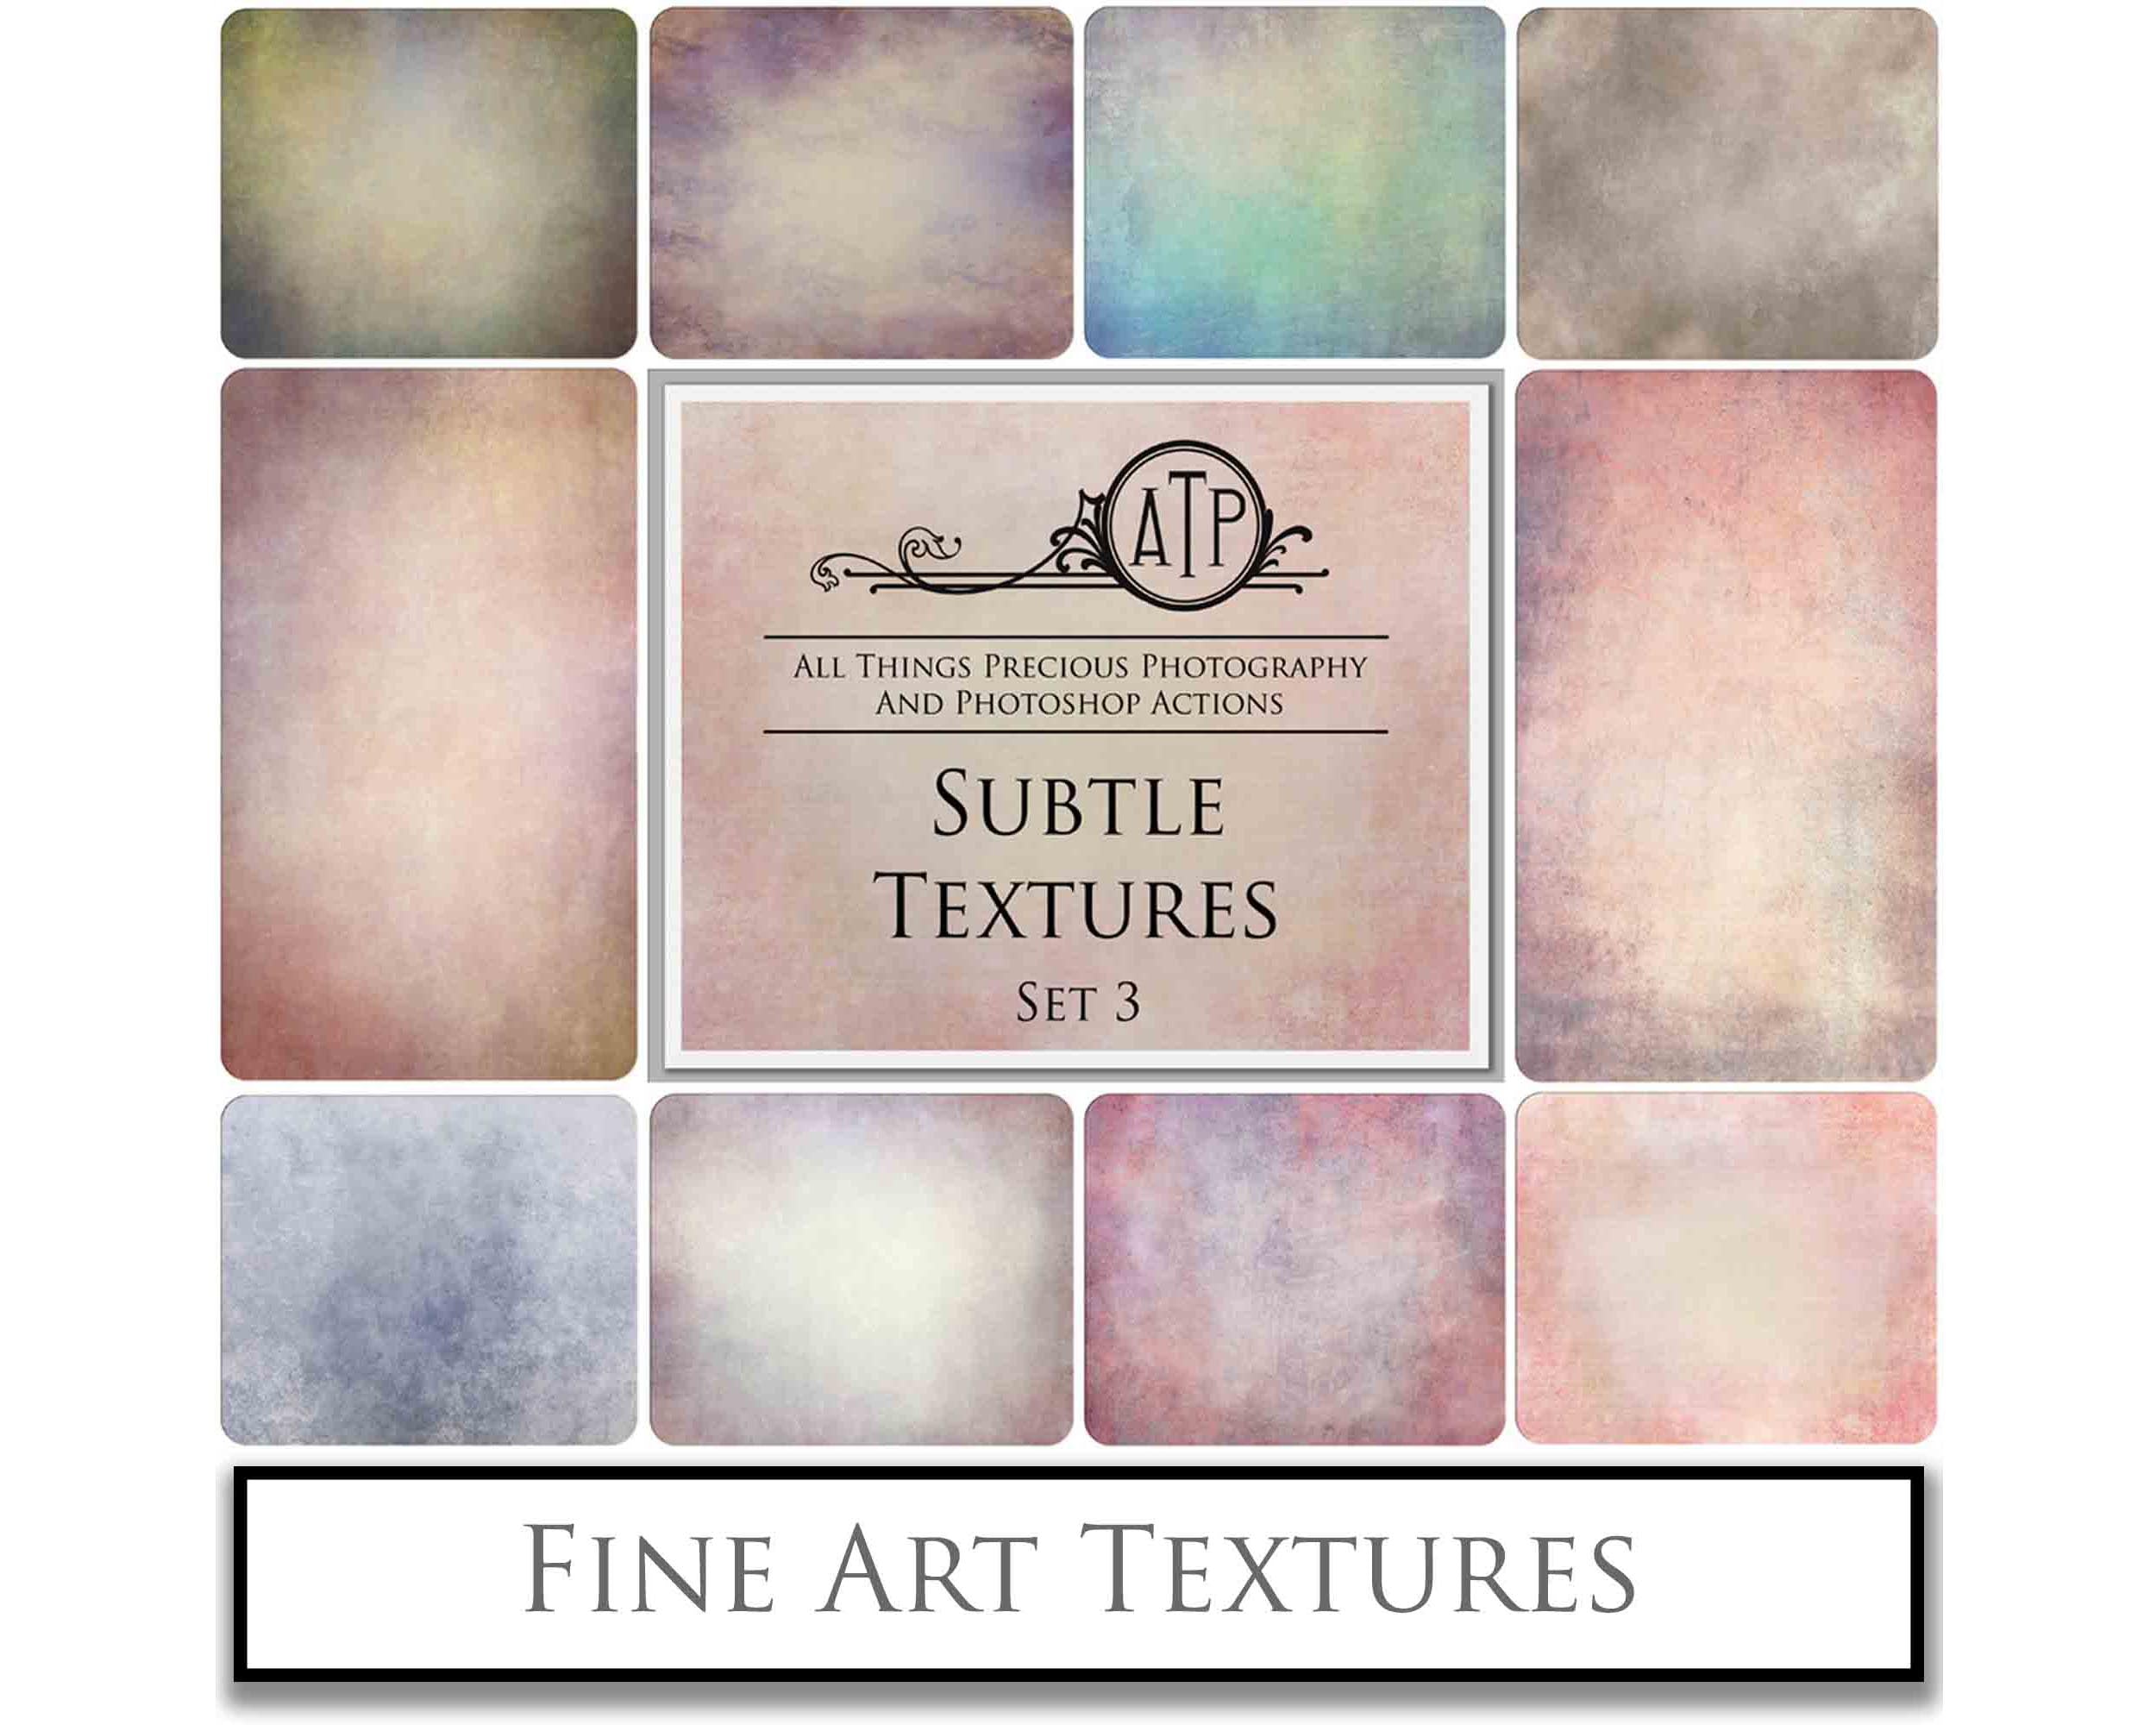  Fine art texture for photographers, digital editing. Photo Overlays. Antique, Vintage, Grunge, Light, Aged Bundle. Textured printable Canvas, Colour, black and white, Bundle. High resolution, 300dpi Graphic Assets for photography, digital scrapbooking and design. By ATP Textures